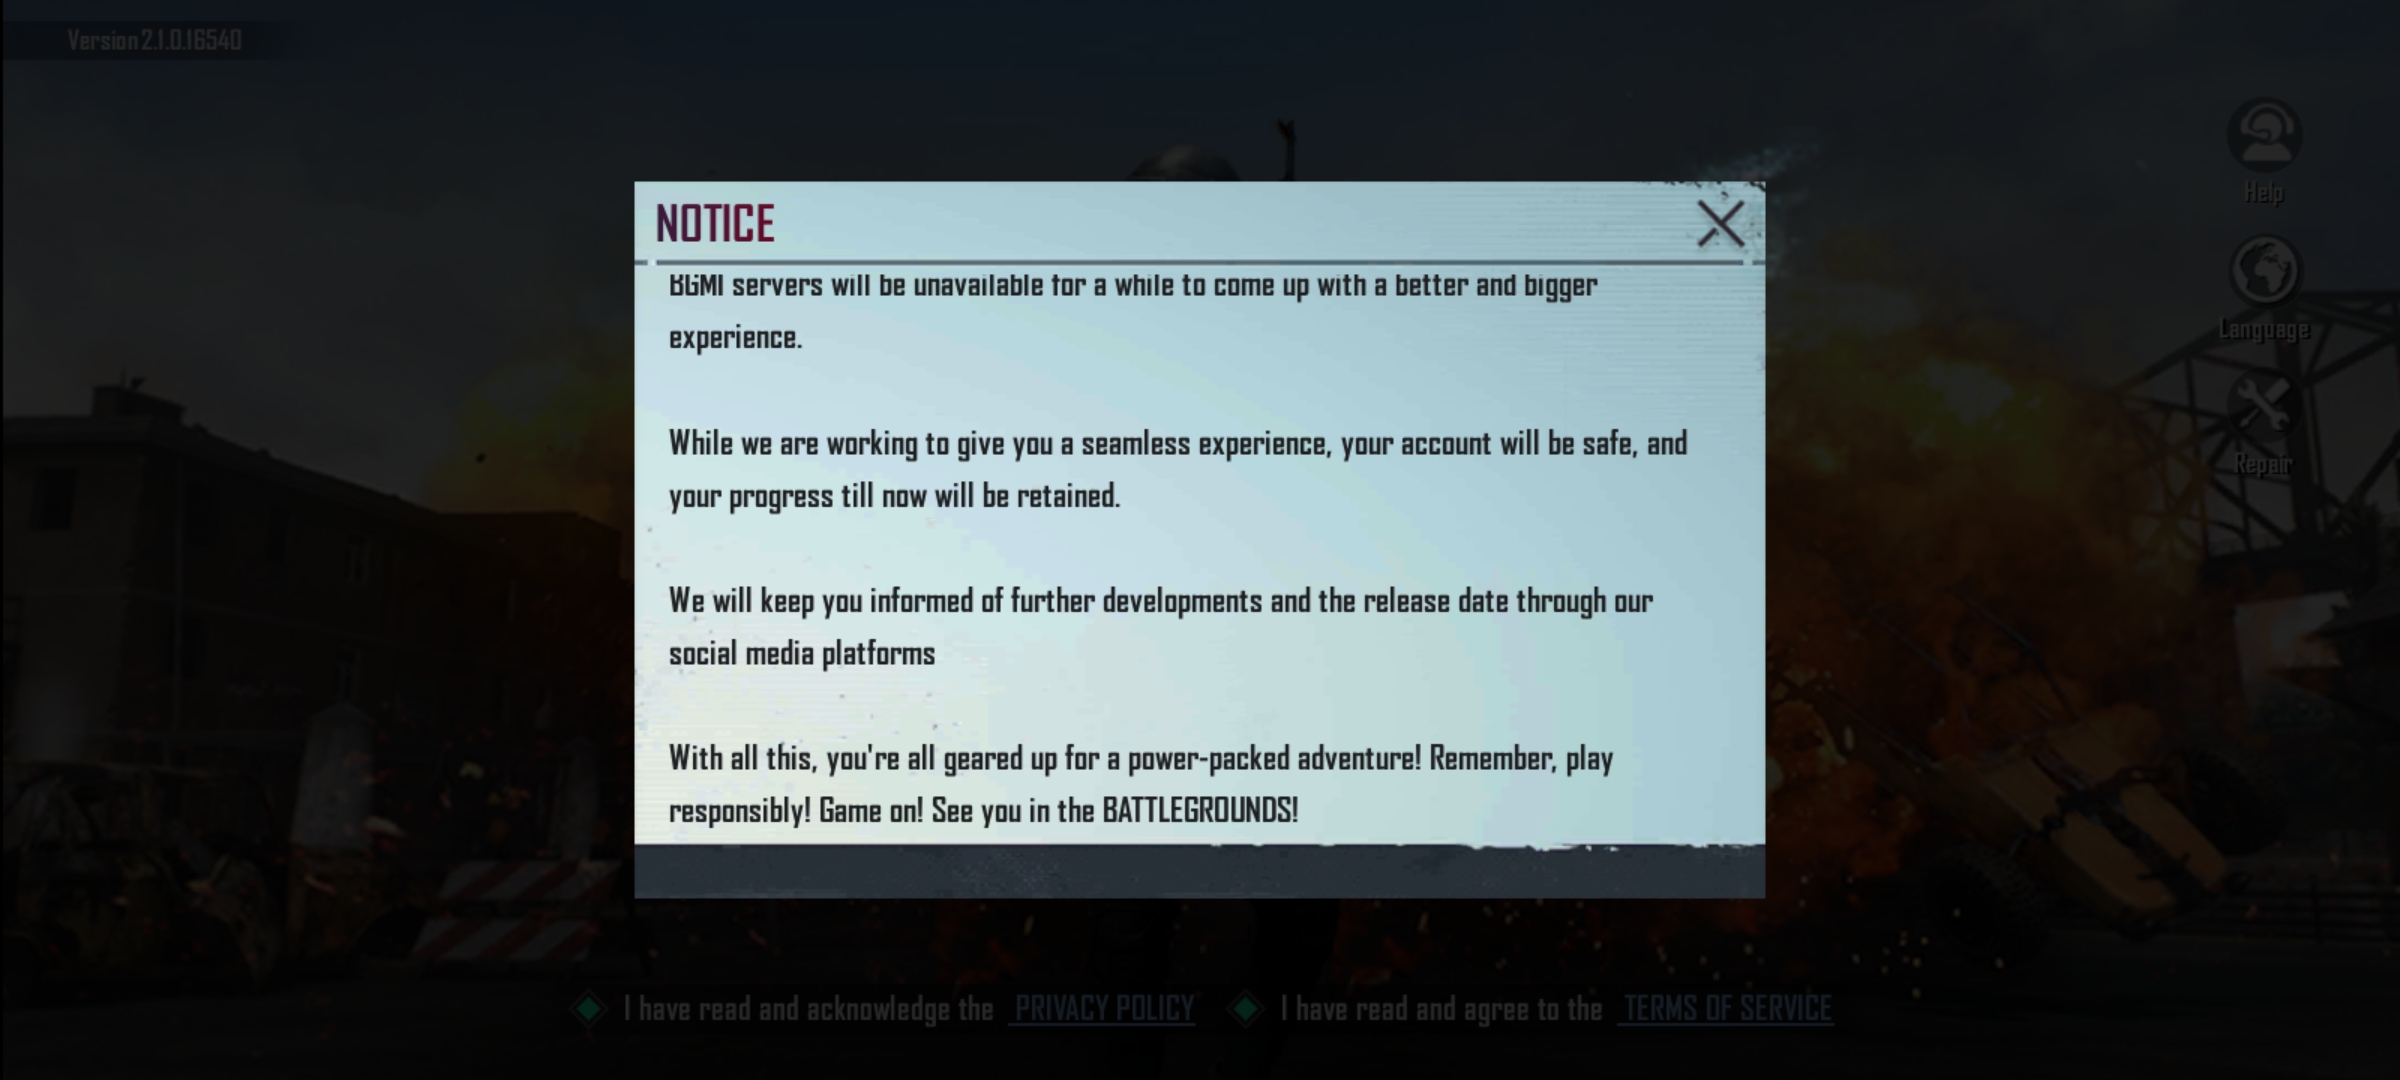 BGMI Unban Date and Time: In-game notice shares info on BGMI coming back to India